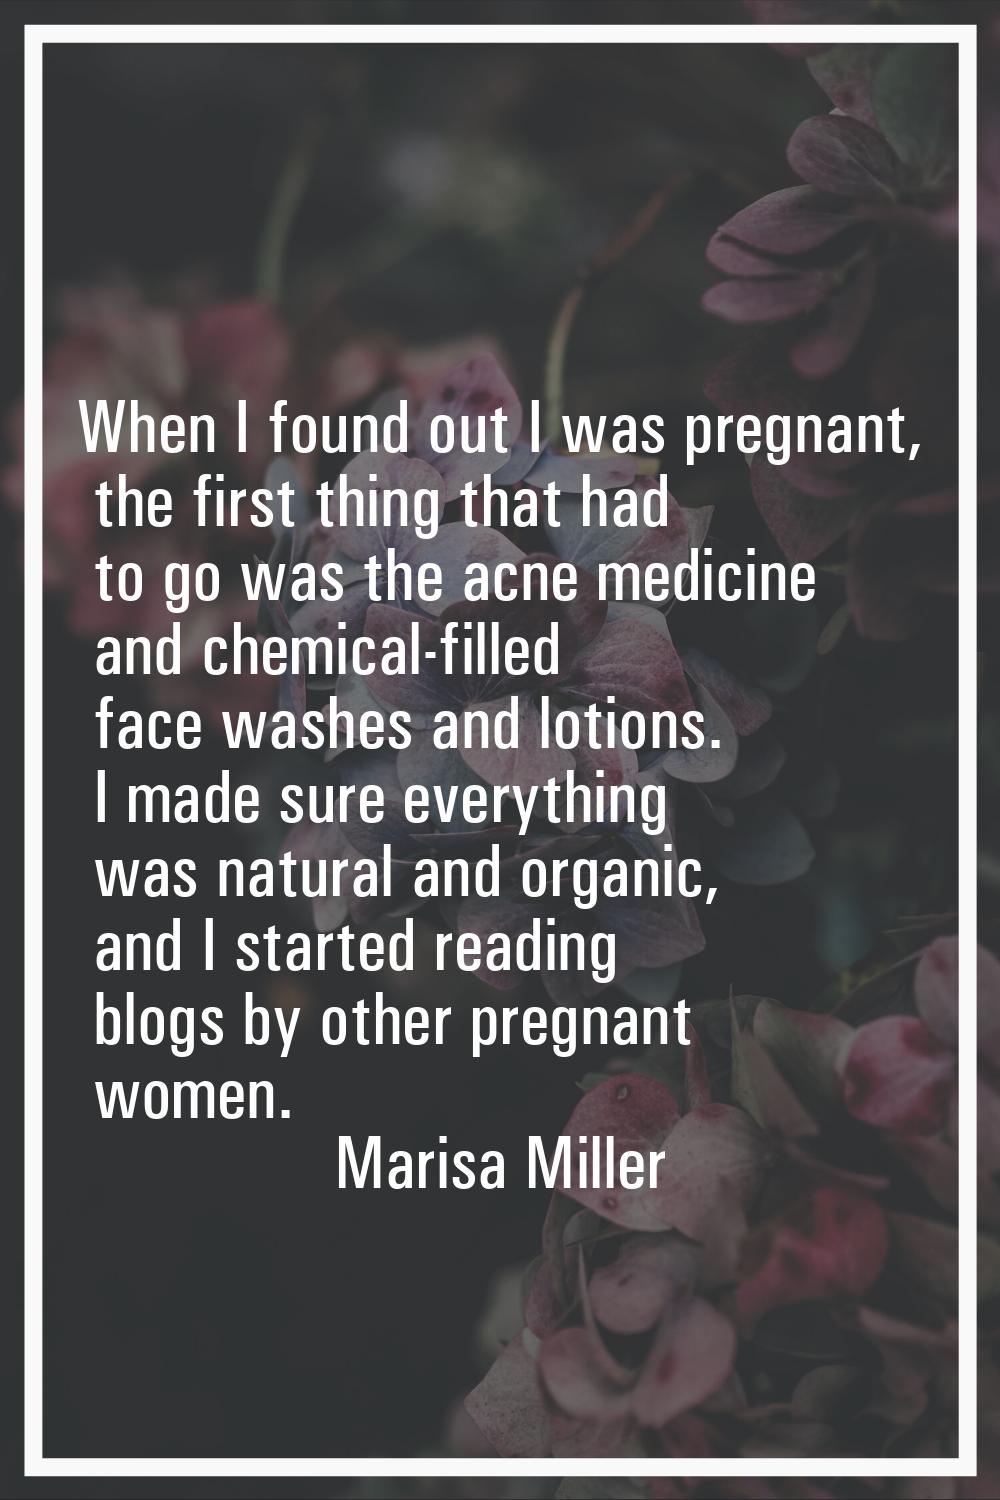 When I found out I was pregnant, the first thing that had to go was the acne medicine and chemical-